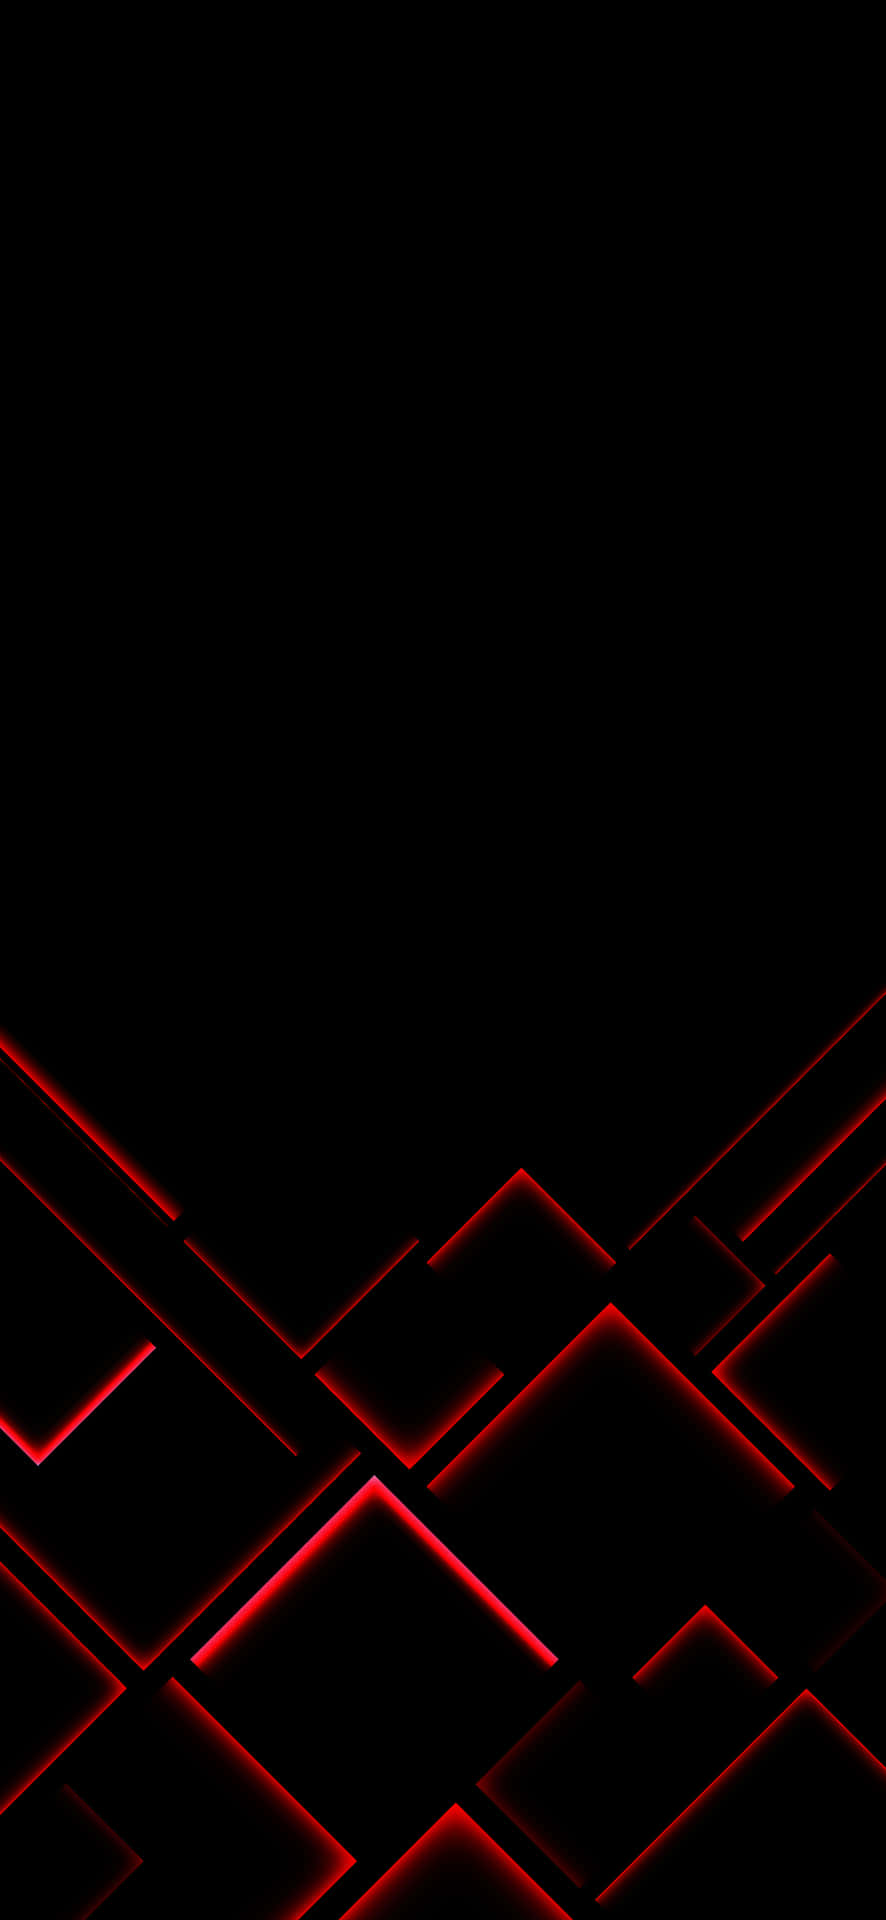 Red And Black Background With Lines